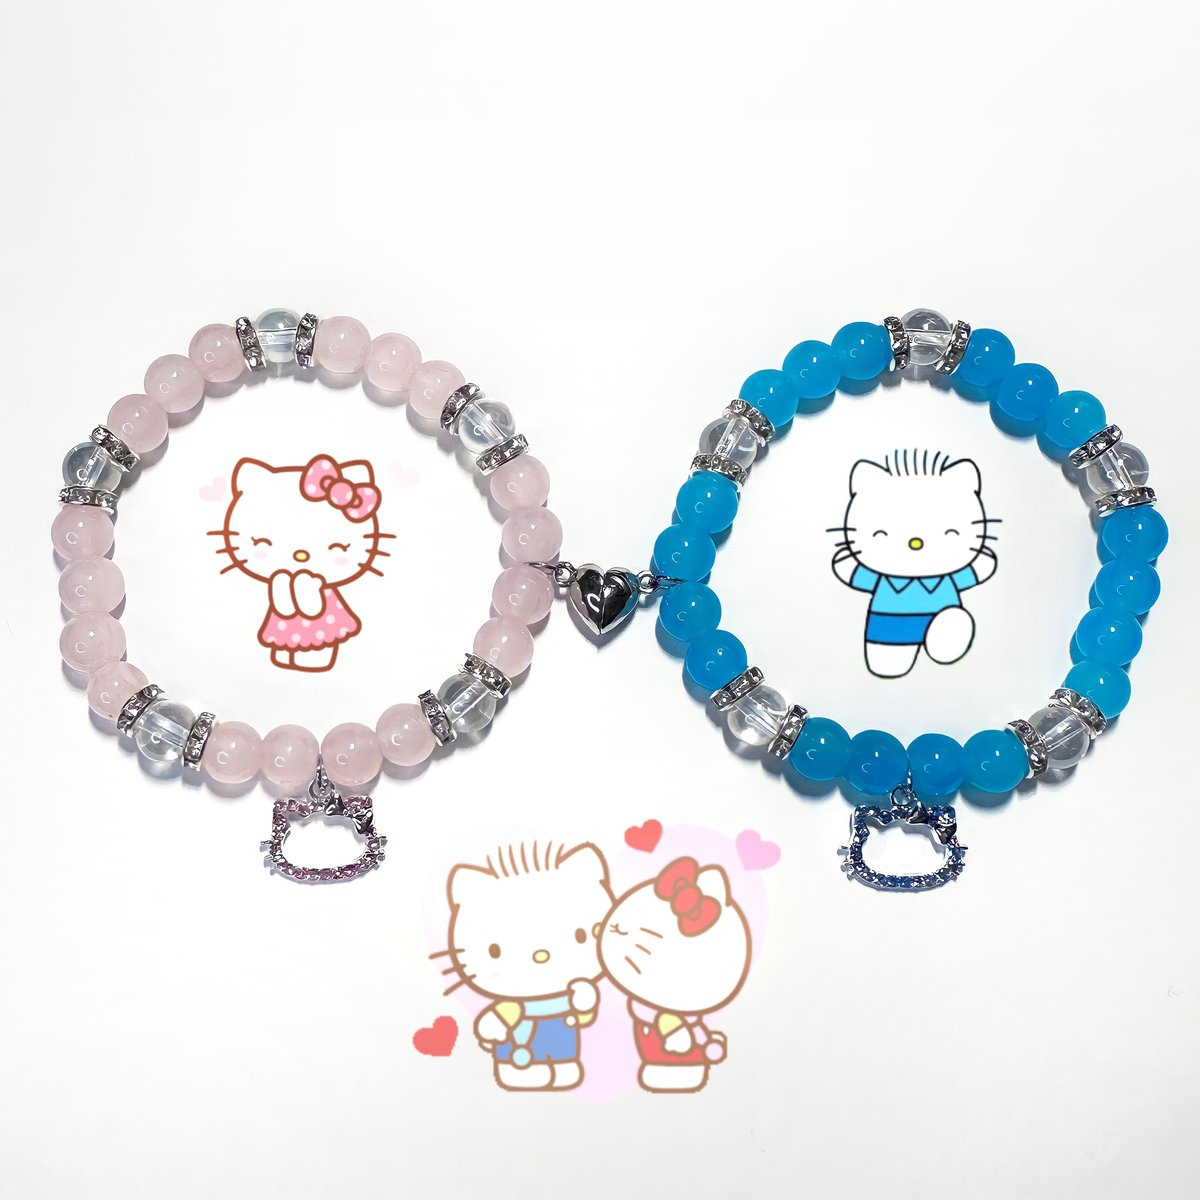 Matching Spiderman and Hello Kitty Bracelets 